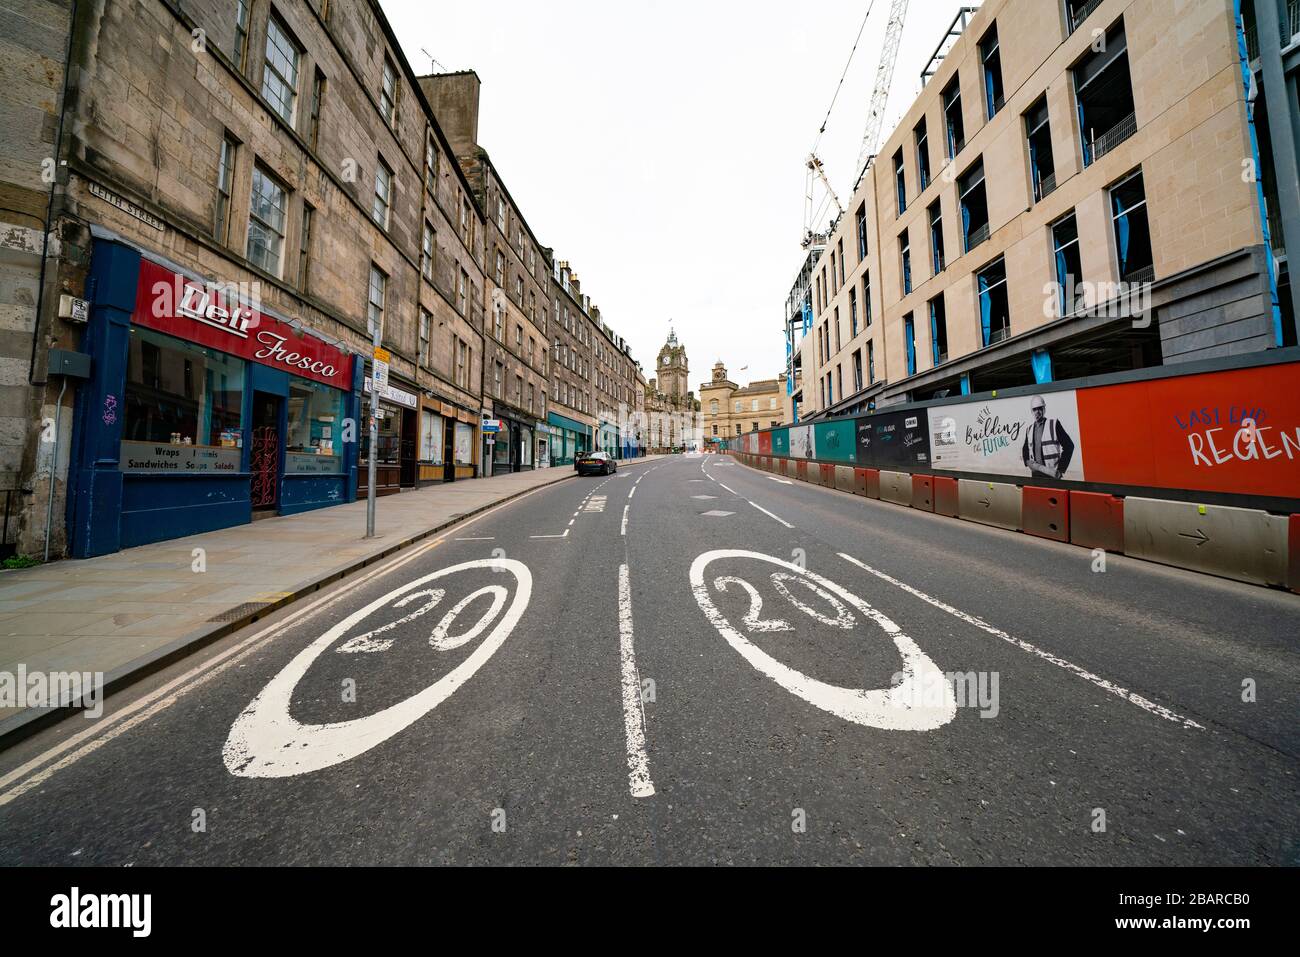 Edinburgh, Scotland, UK. 29 March, 2020. Life in Edinburgh on the first Sunday of the Coronavirus lockdown. Streets deserted, shops and restaurants closed, very little traffic on streets and reduced public transport. Pictured; Leith Walk. Iain Masterton/Alamy Live News Stock Photo